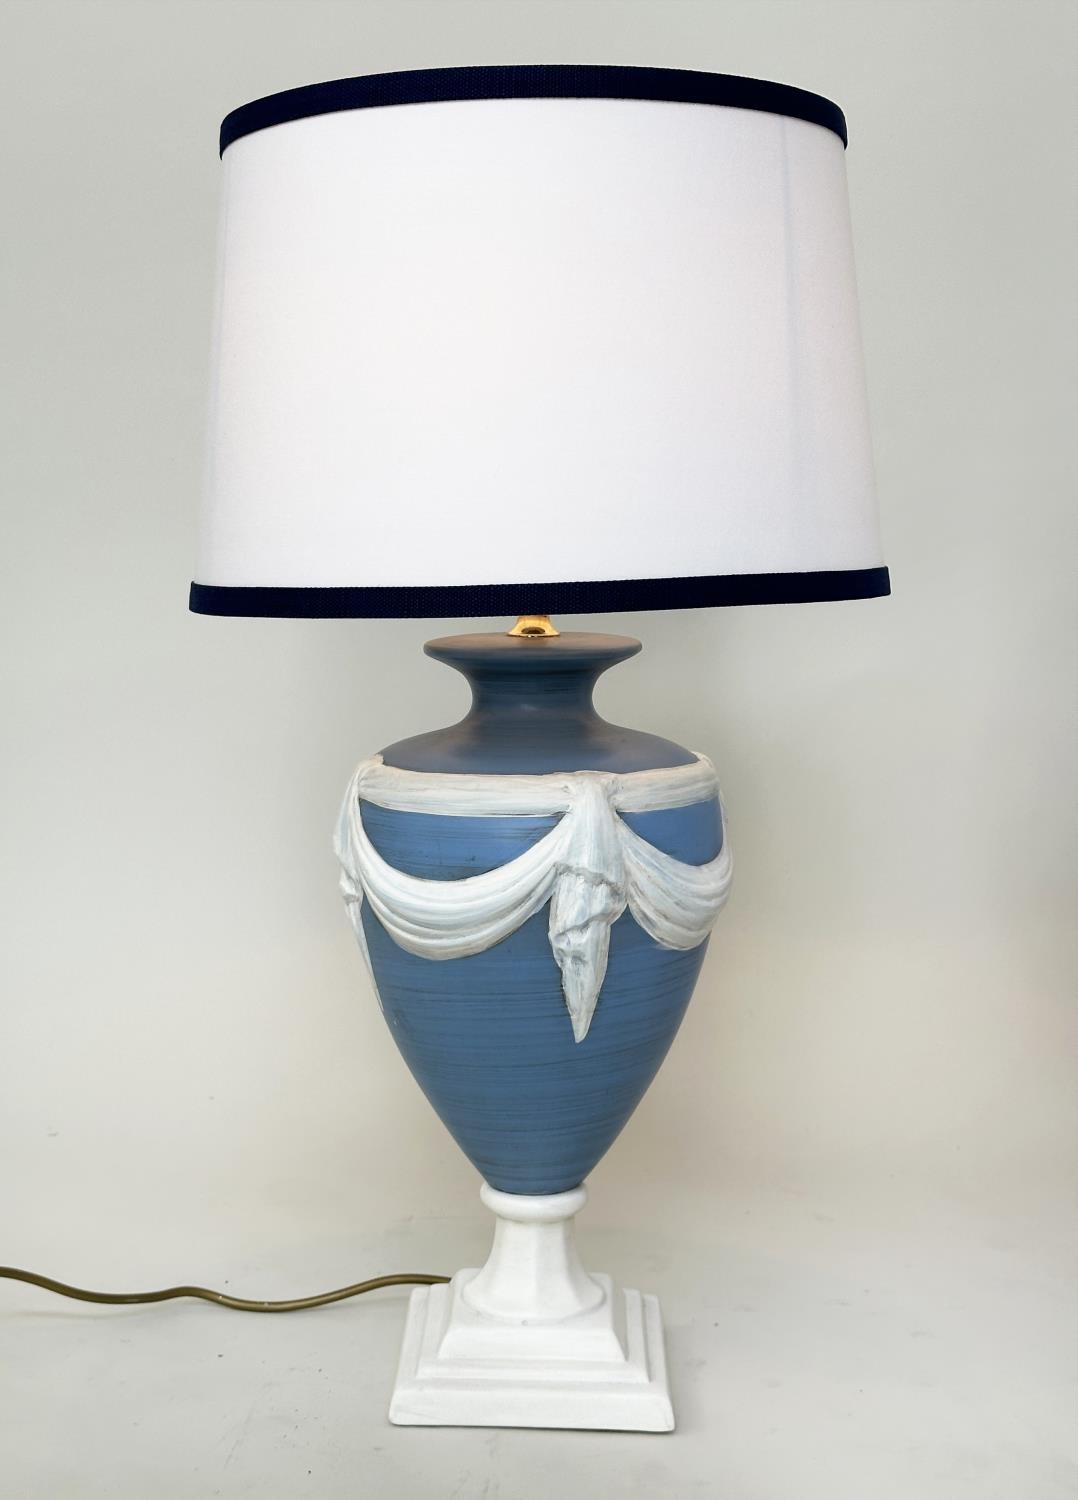 TABLE LAMPS, a pair, Wedgwood jasperware style of vase form with shades, 70cm H. - Image 10 of 12